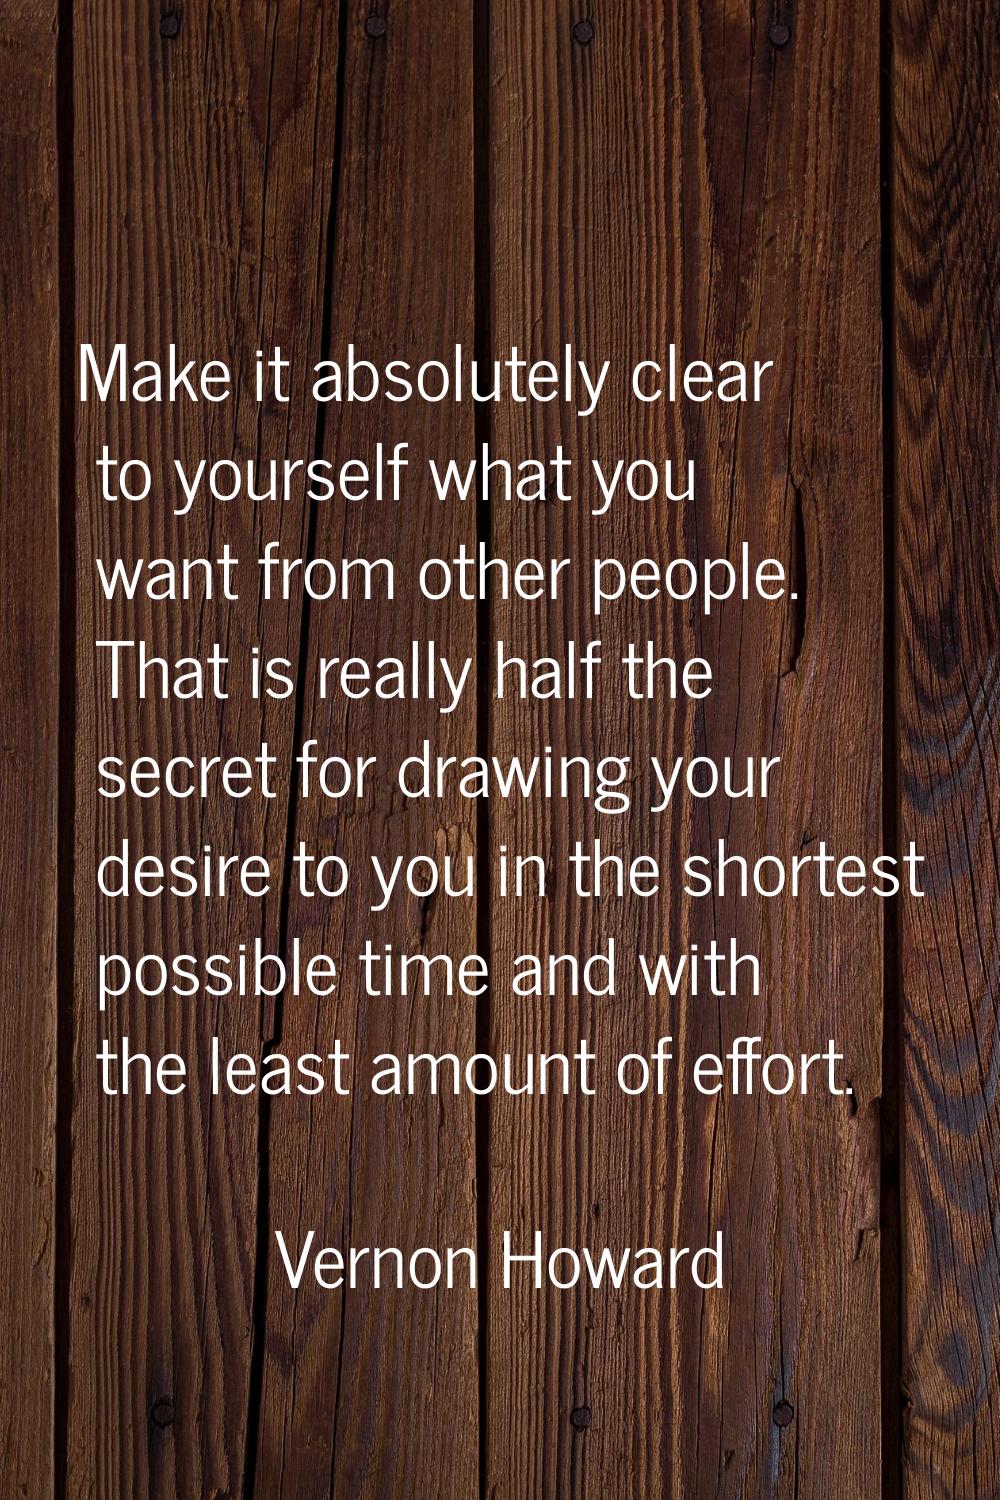 Make it absolutely clear to yourself what you want from other people. That is really half the secre